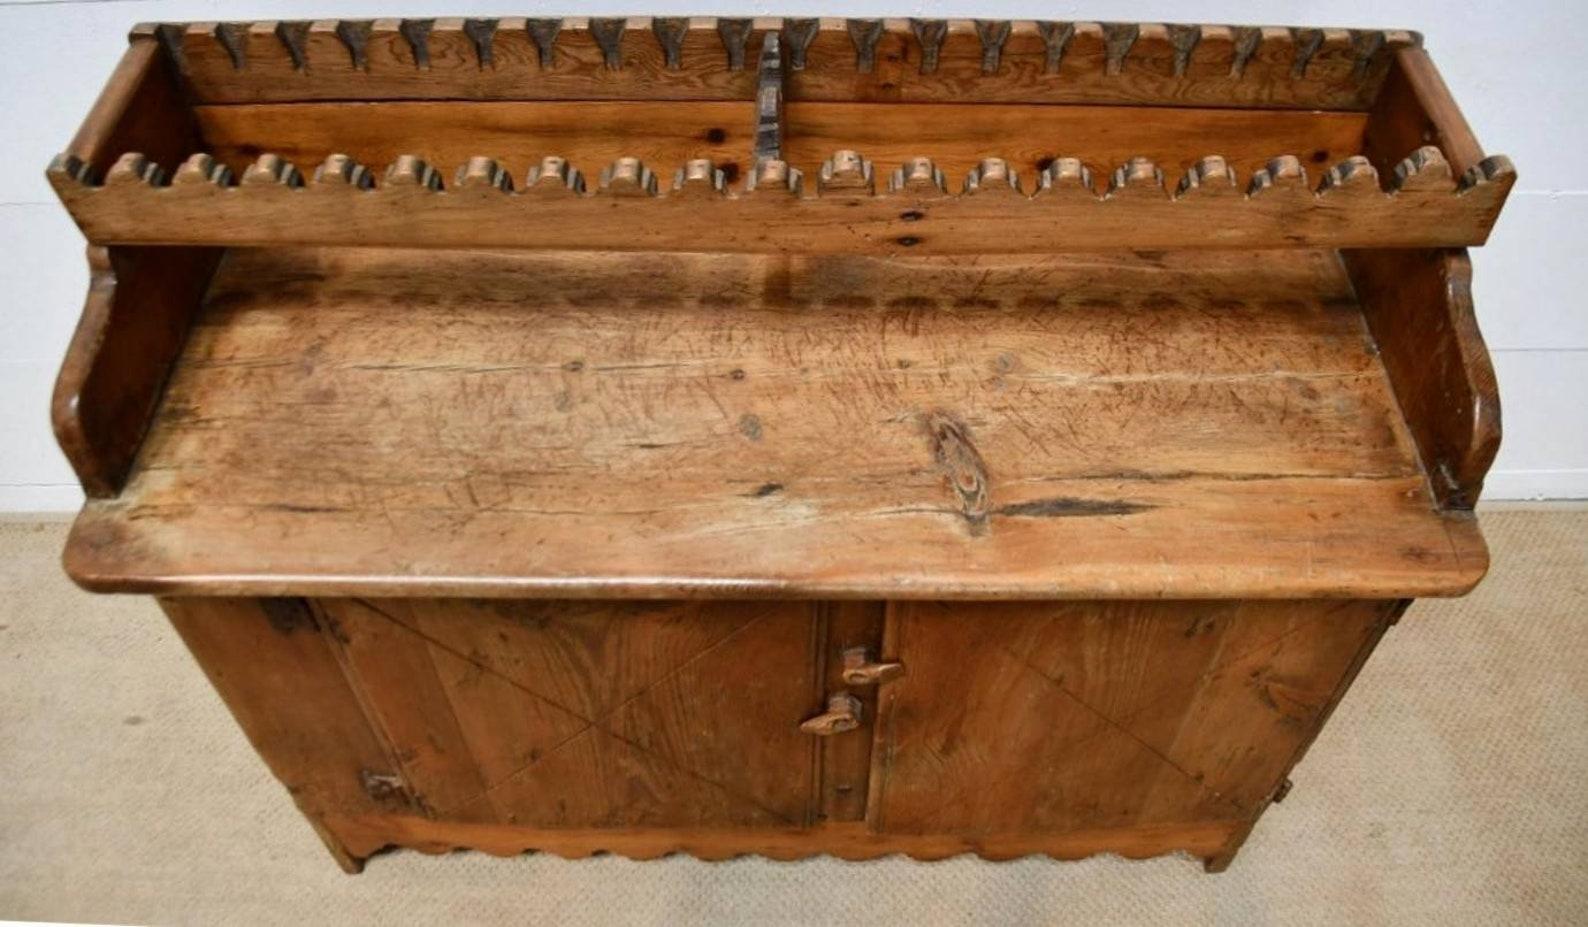 Patina Perfection! A rustic late 18th / early 19th century country French farmhouse kitchen buffet with open dish rack.

Born in the rural French countryside, hand-crafted of solid pine with traditional mortise and tenon pegged construction,